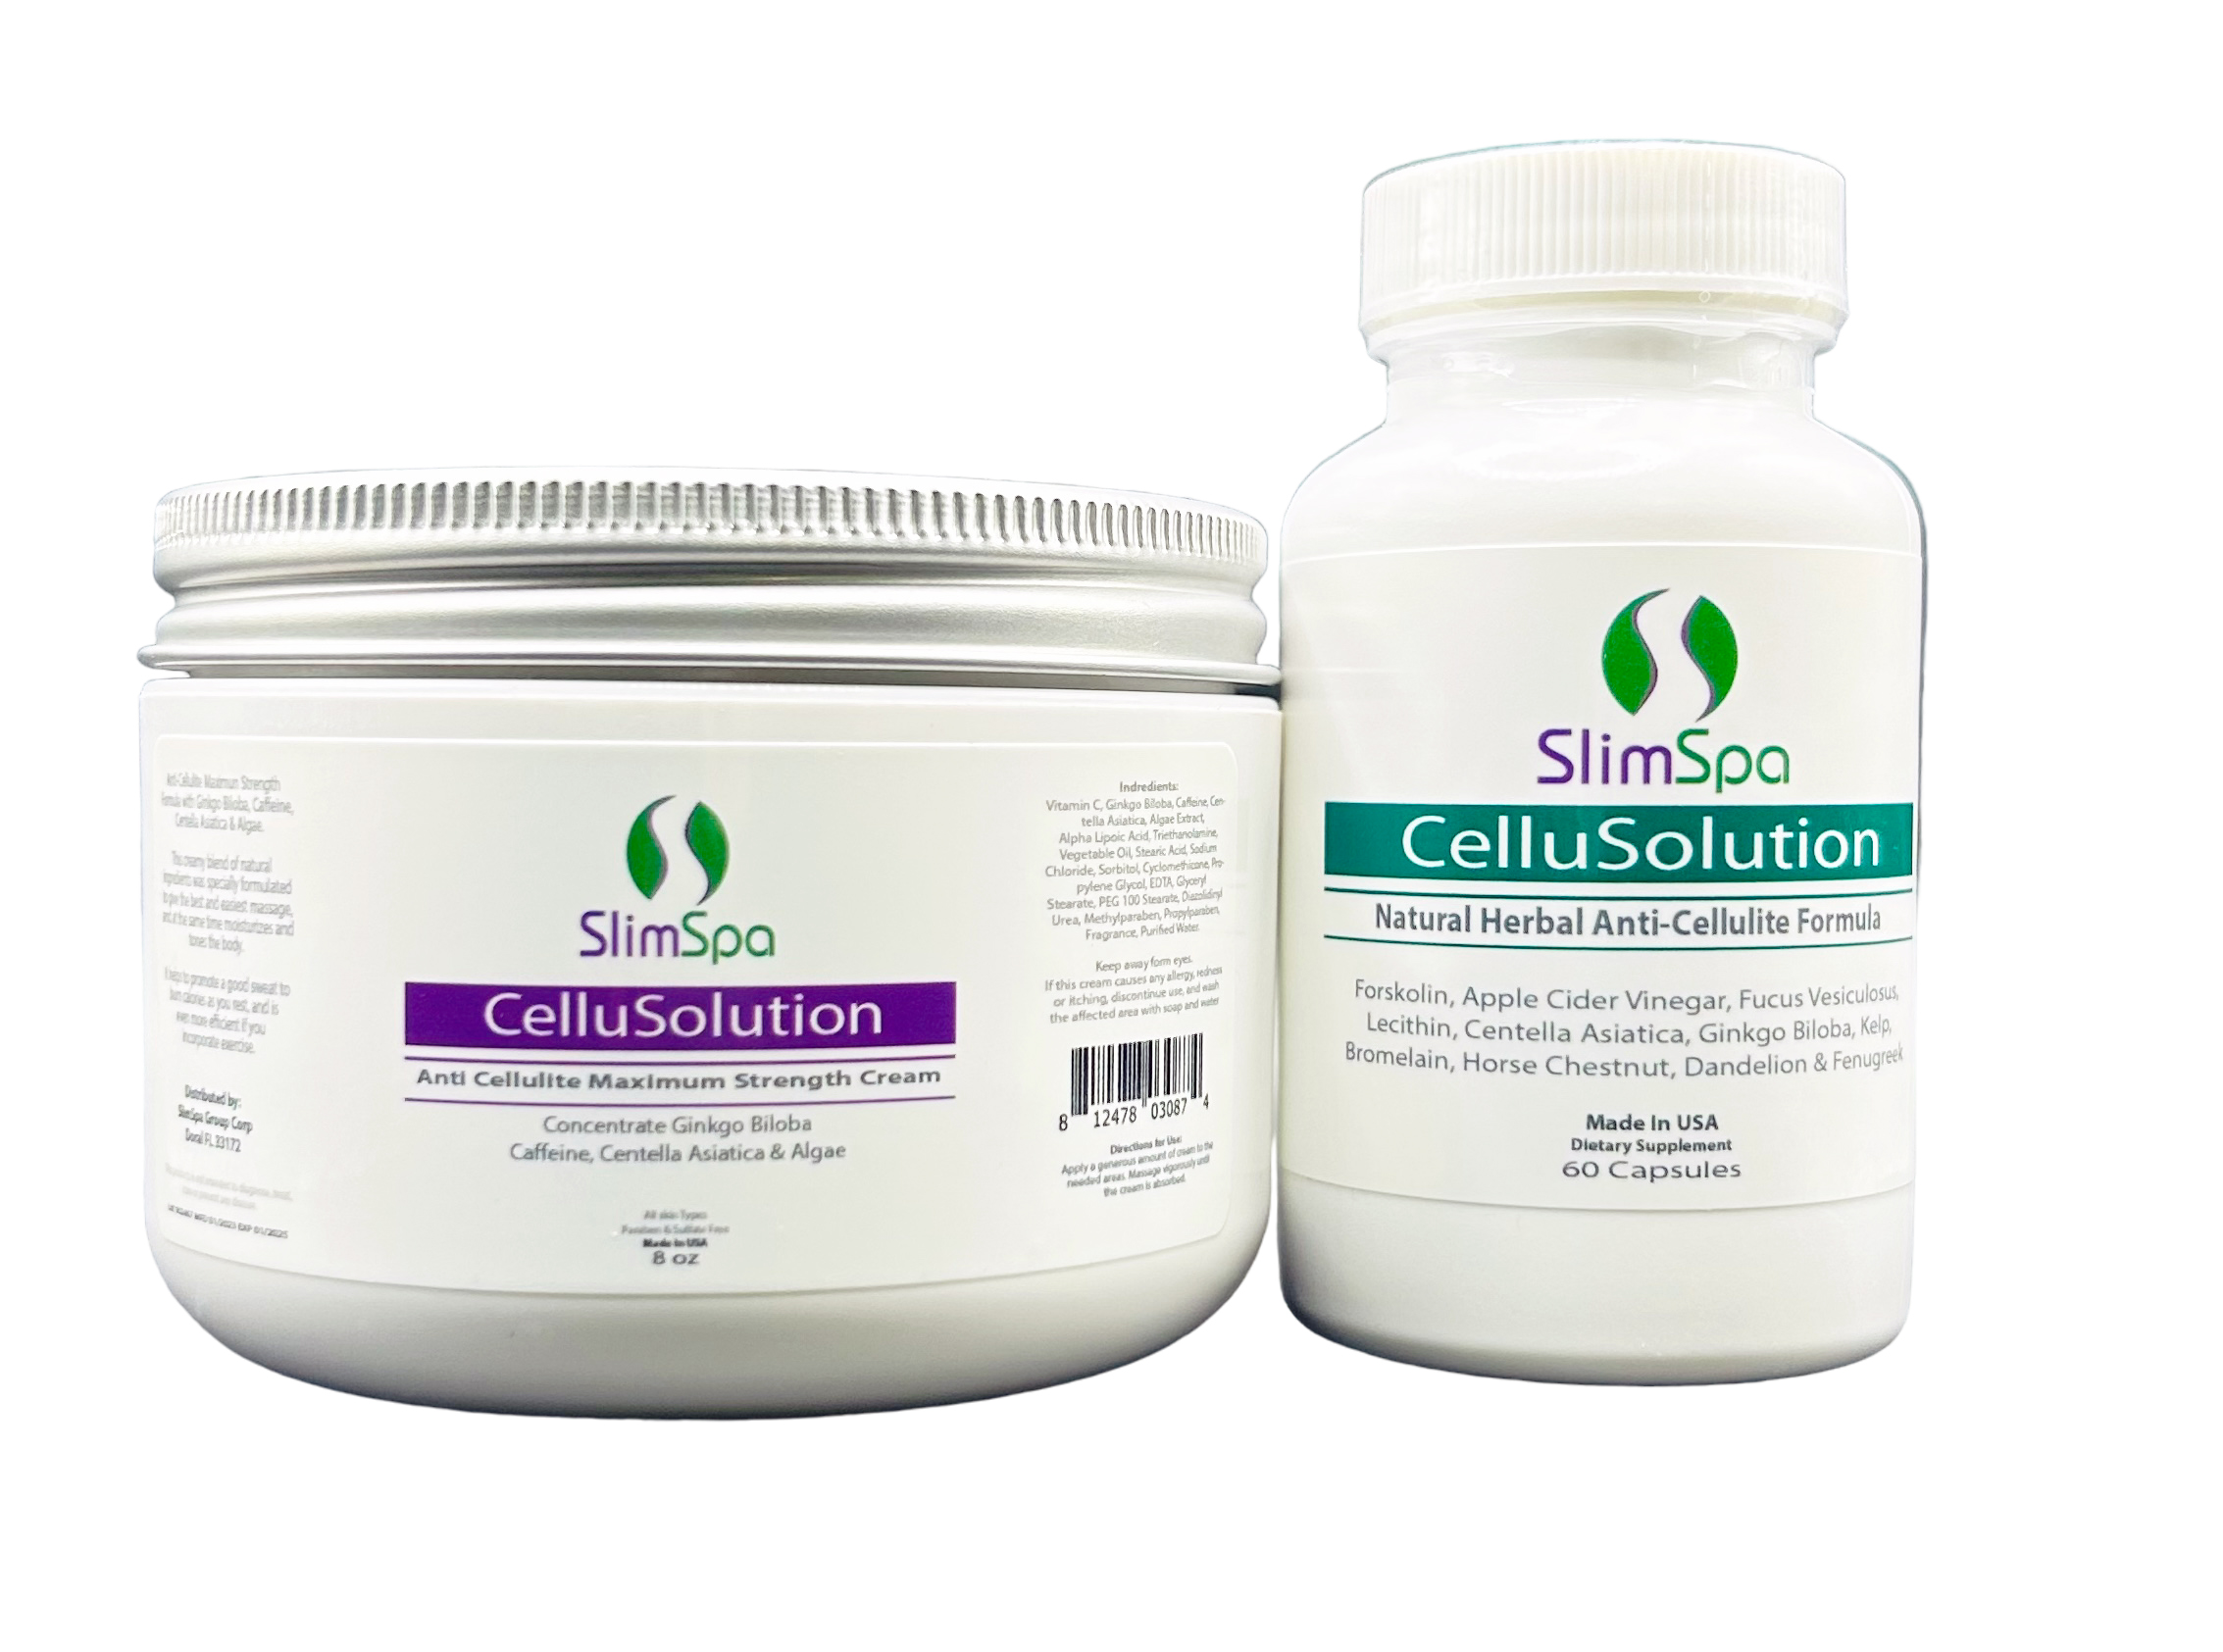 Efficacy evaluation of a herbal anti-cellulite lotion: a phase 2